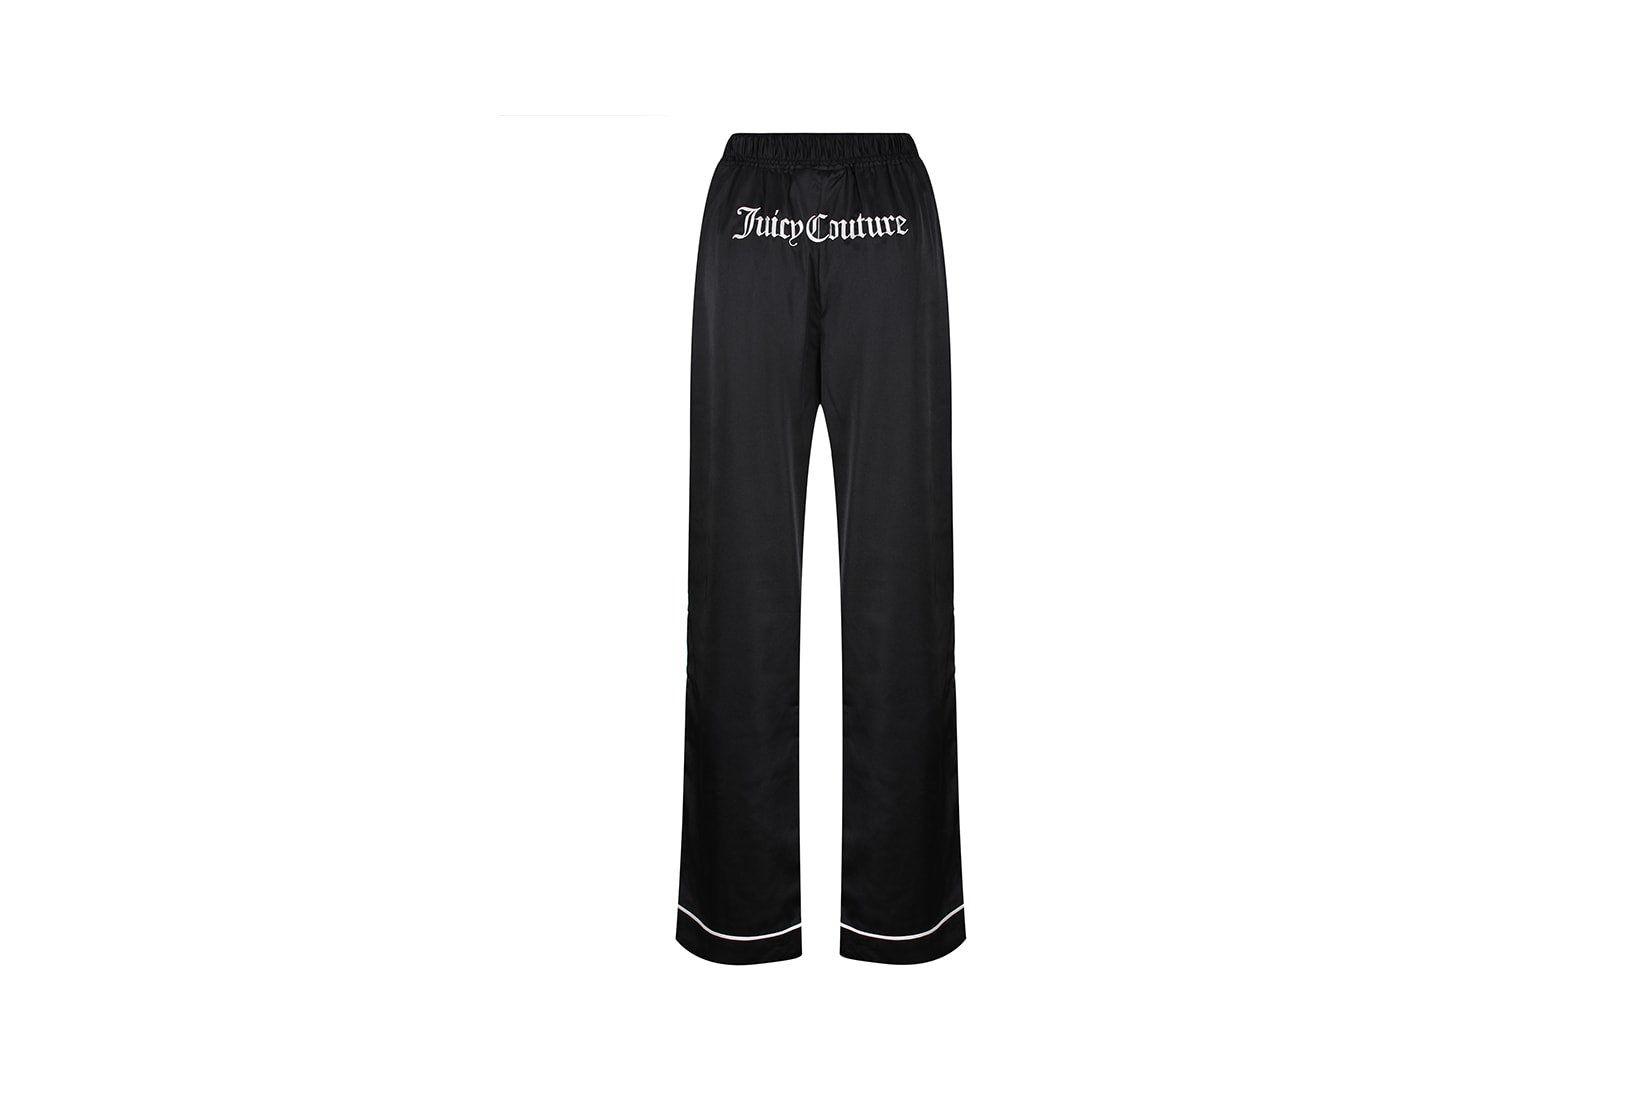 juicy couture nightwear collection pajama shorts pants